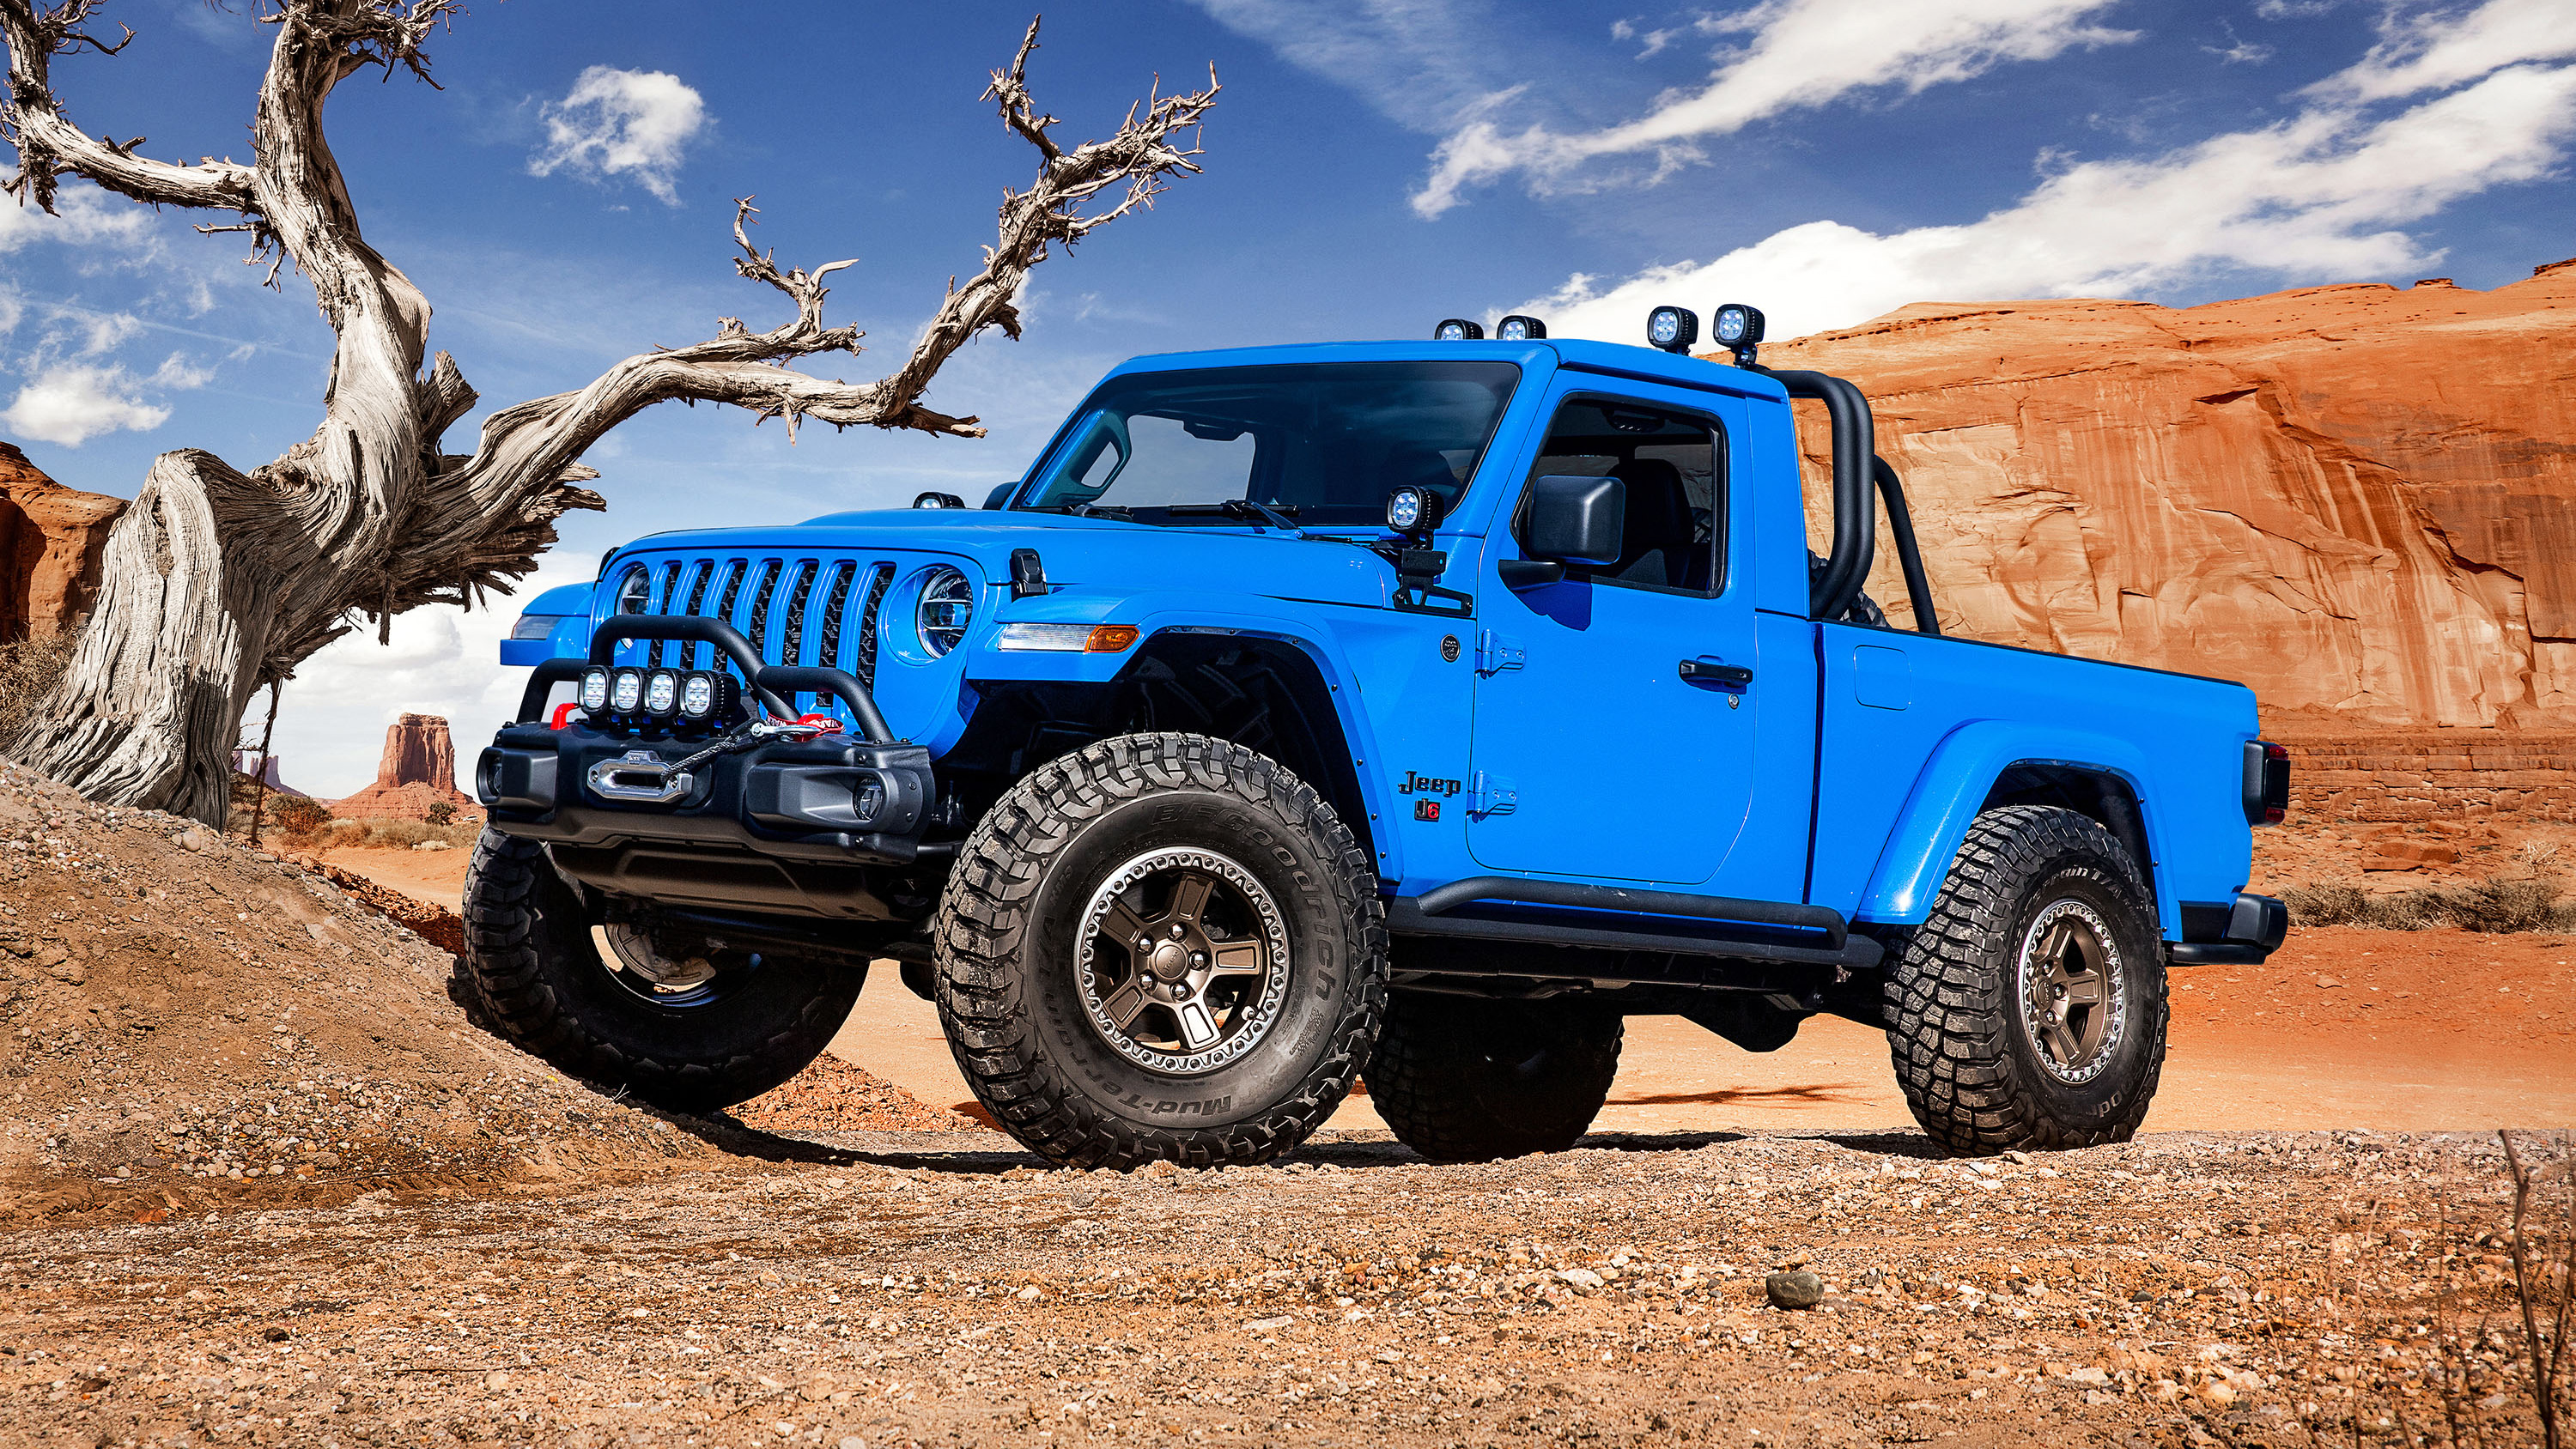 Blue Pickup Jeep J6 2019 On The Background Of Mountains Near A Dry Tree Wallpapers And Images Wallpapers Pictures Photos